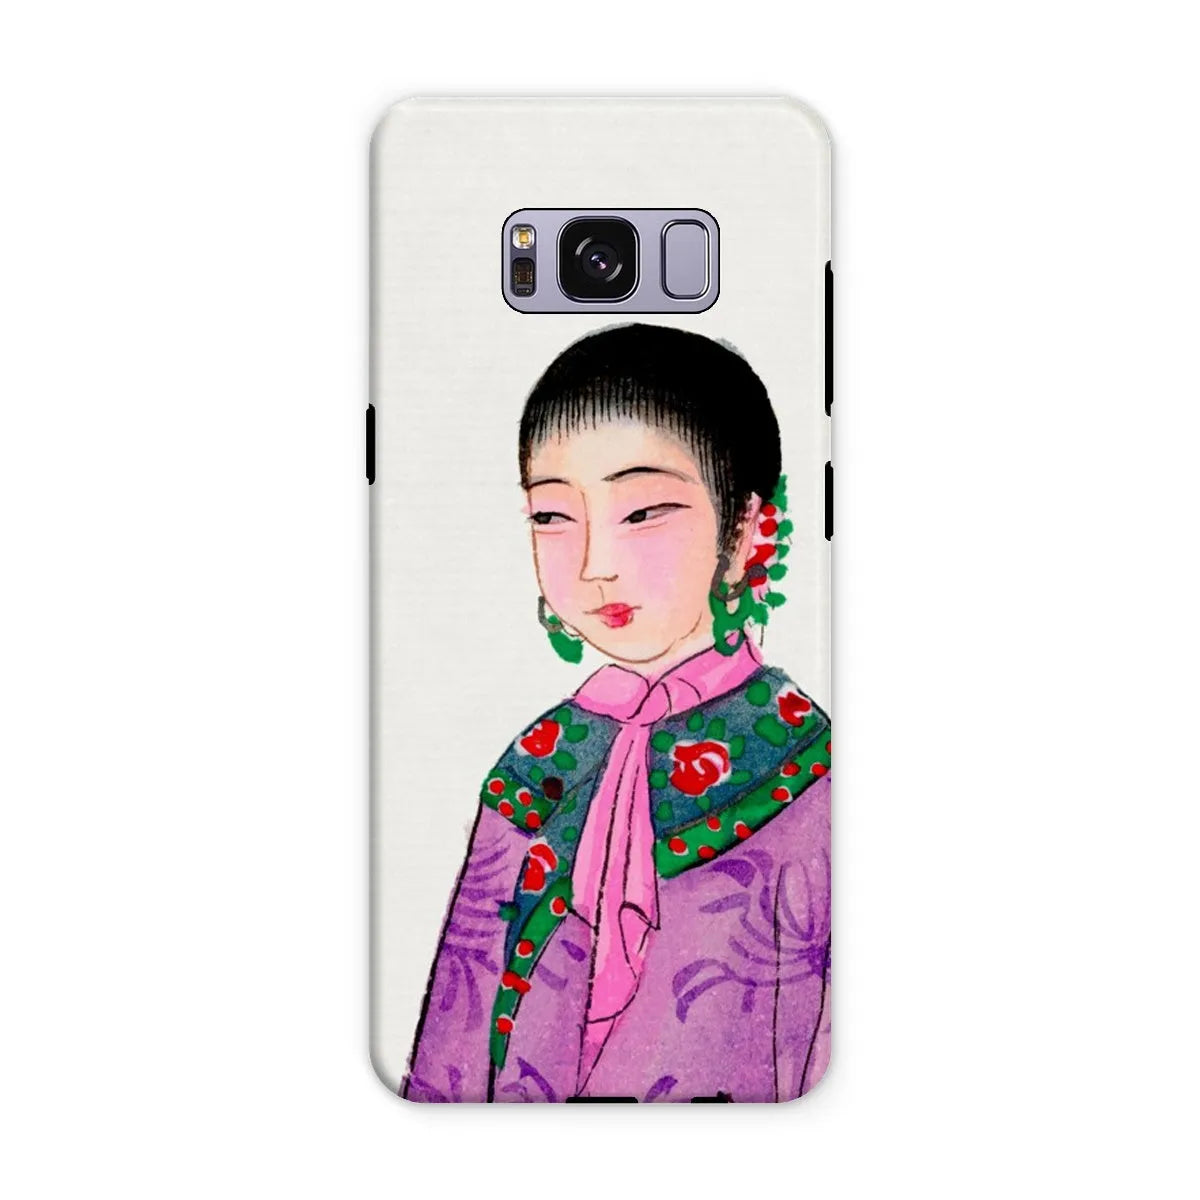 Manchu Noblewoman - Chinese Aesthetic Art Phone Case - Samsung Galaxy S8 Plus / Matte - Mobile Phone Cases - Aesthetic